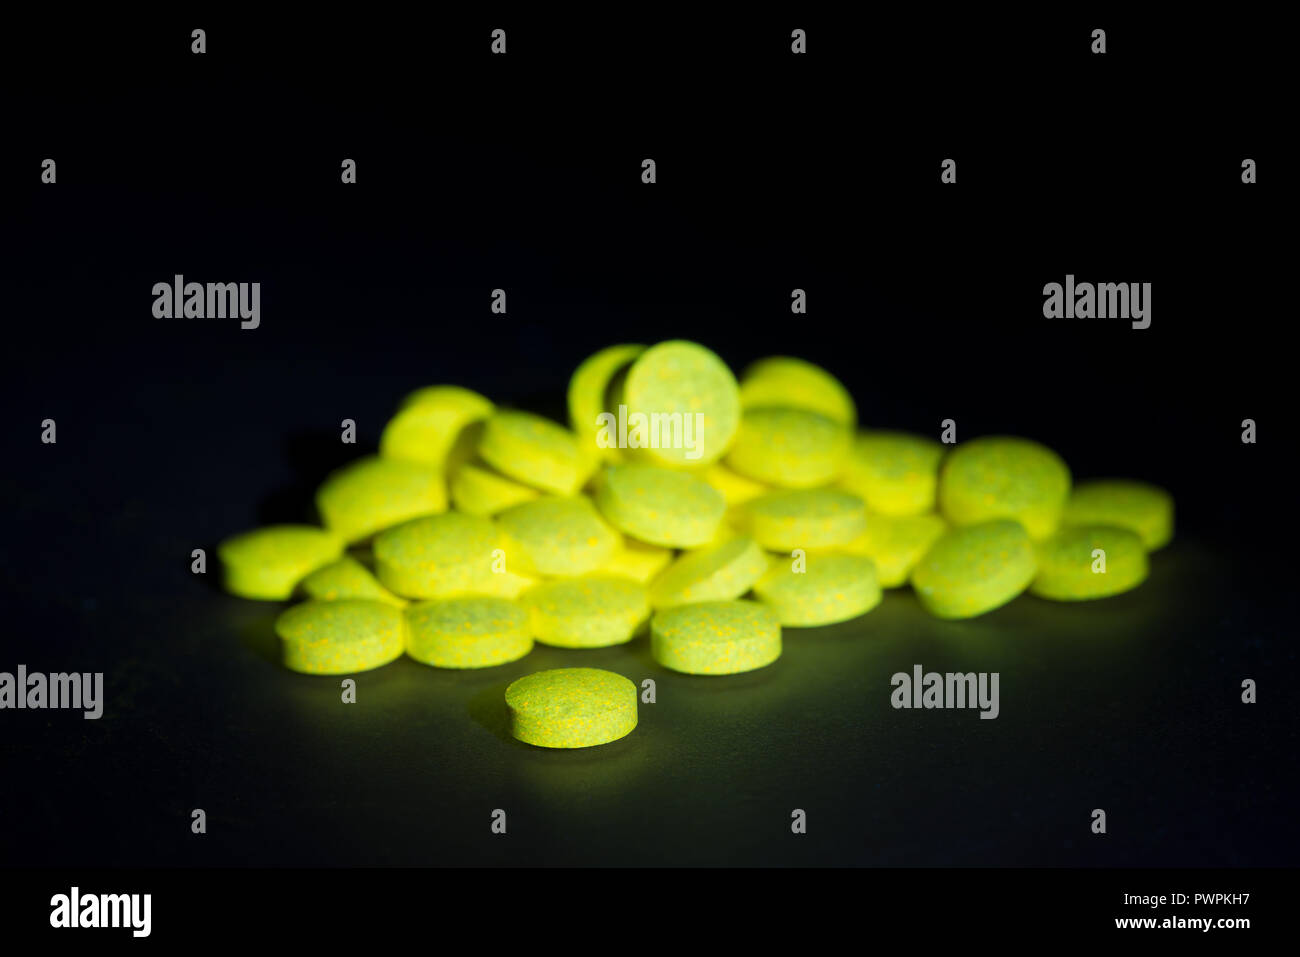 Glowing vitamin B complex pills and tablets fluorescing visible yellow light having been exposed to blacklight, glowing in darkness Stock Photo